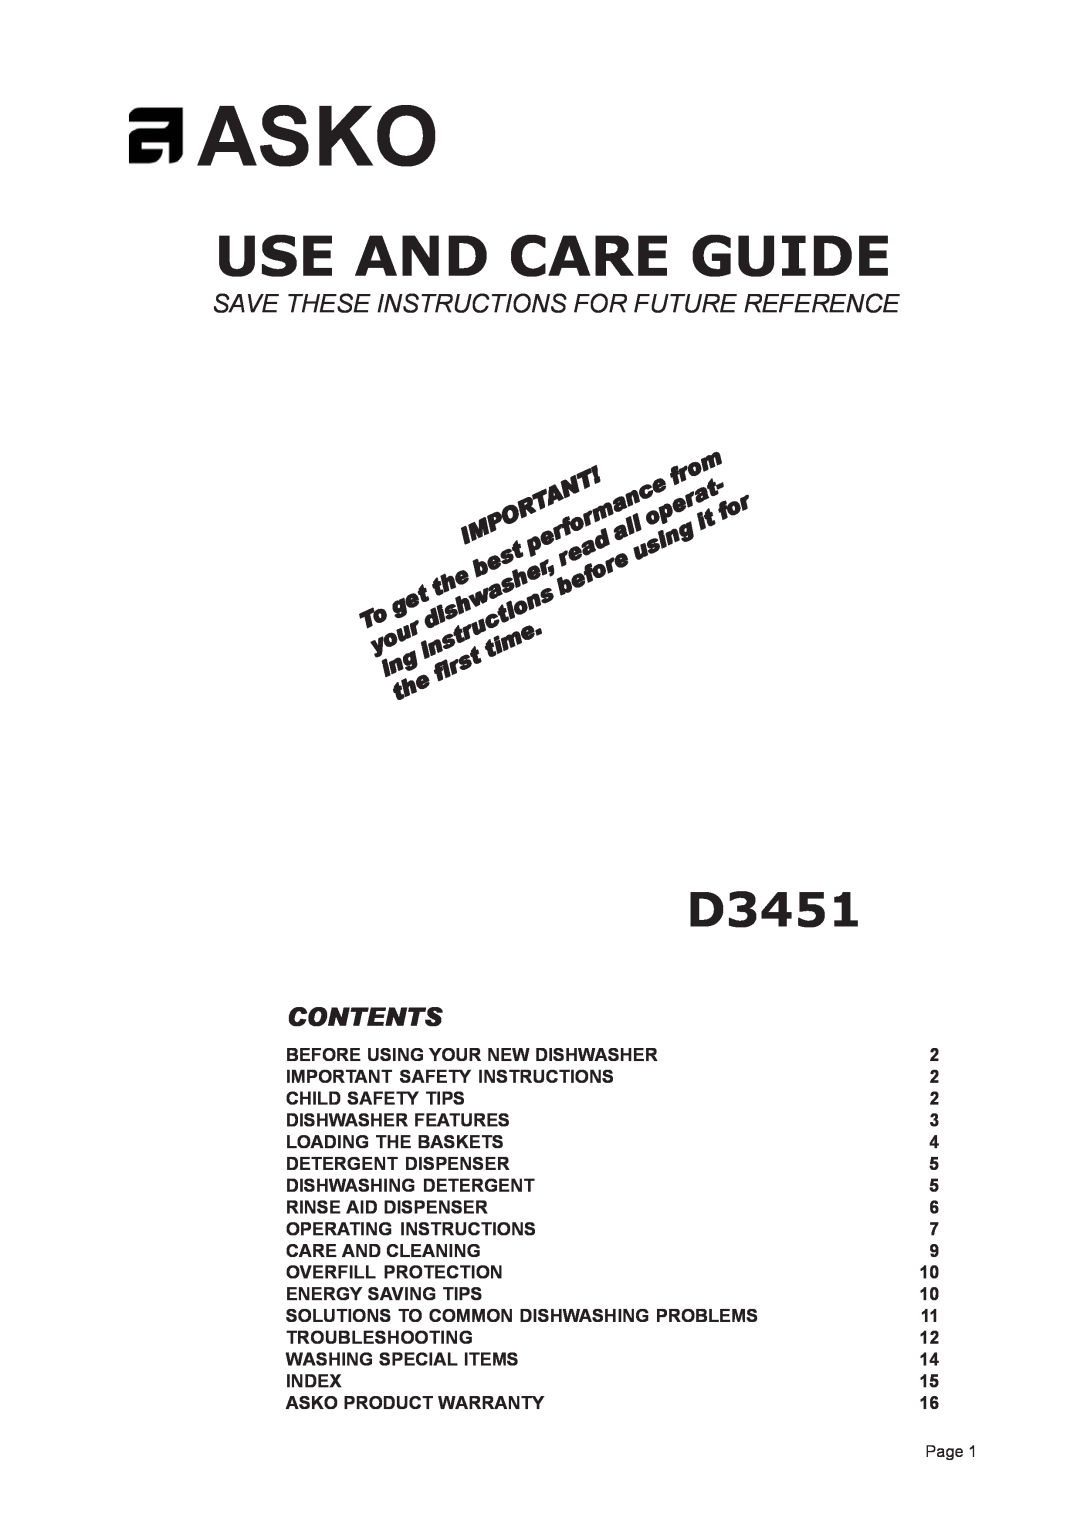 Asko D3451XL important safety instructions Asko, Use And Care Guide, Save These Instructions For Future Reference, mance 